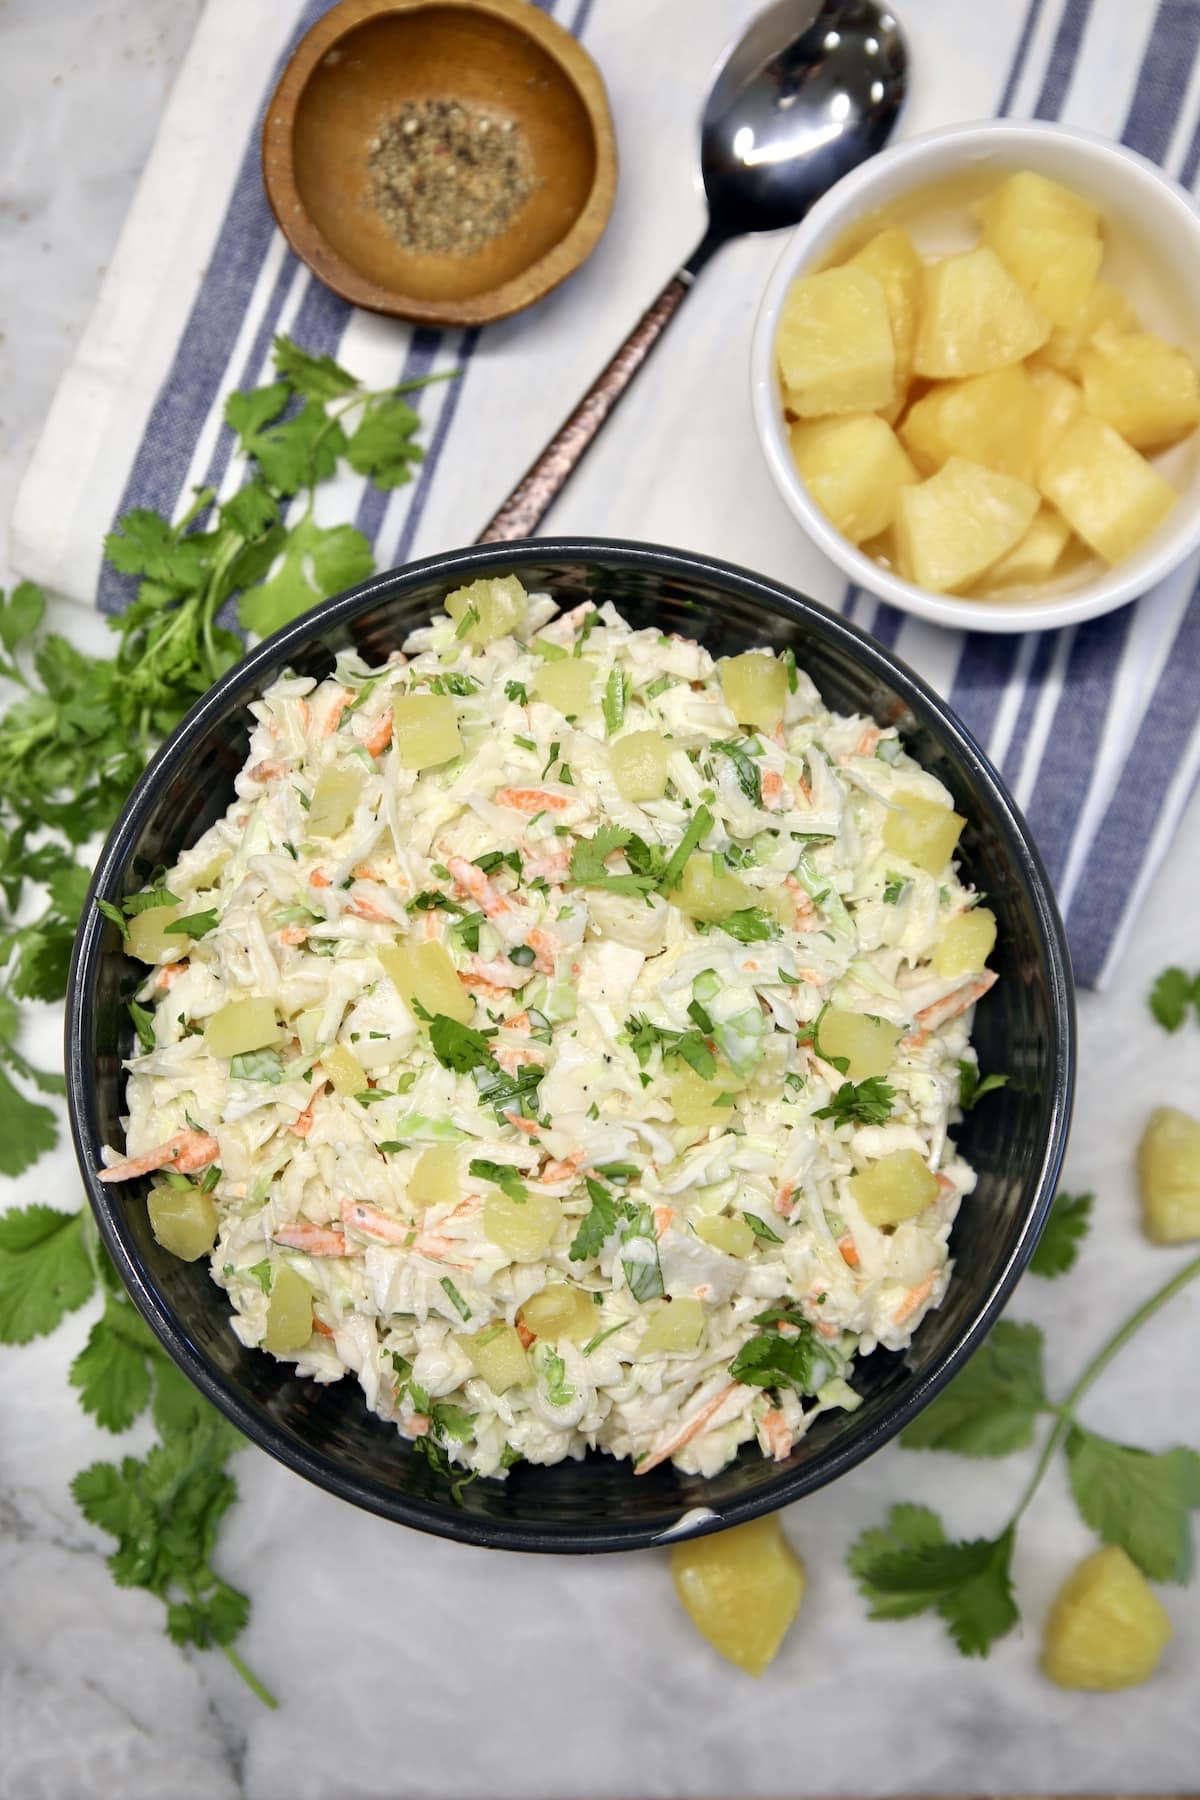 Bowl of pineapple coleslaw, small bowl of pineapple, cilantro.